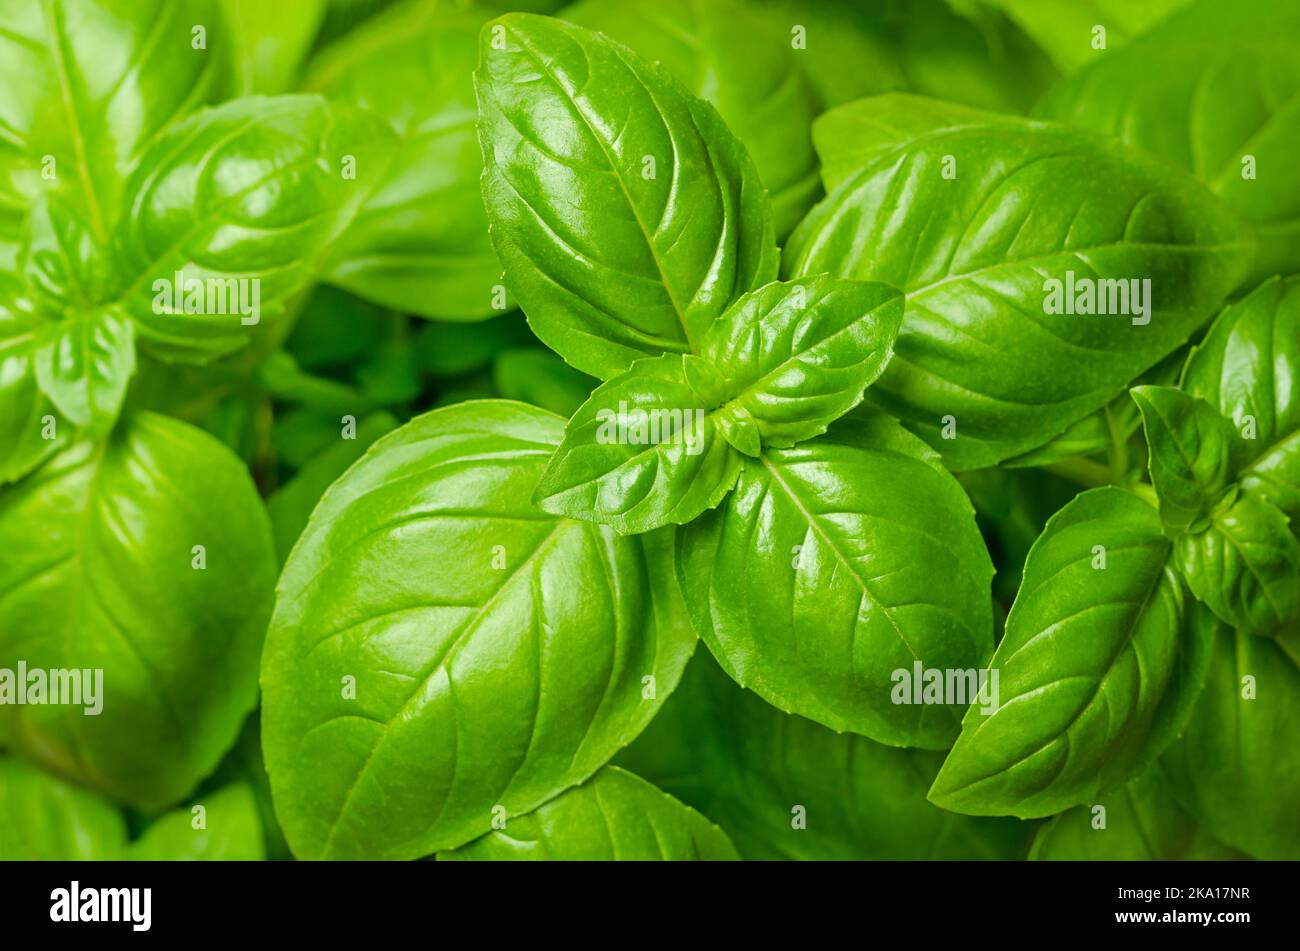 Basil leaves, from above. Also known as sweet, great or Genovese basil, Ocimum basilicum, a culinary herb in the mint family Lamiaceae. Stock Photo